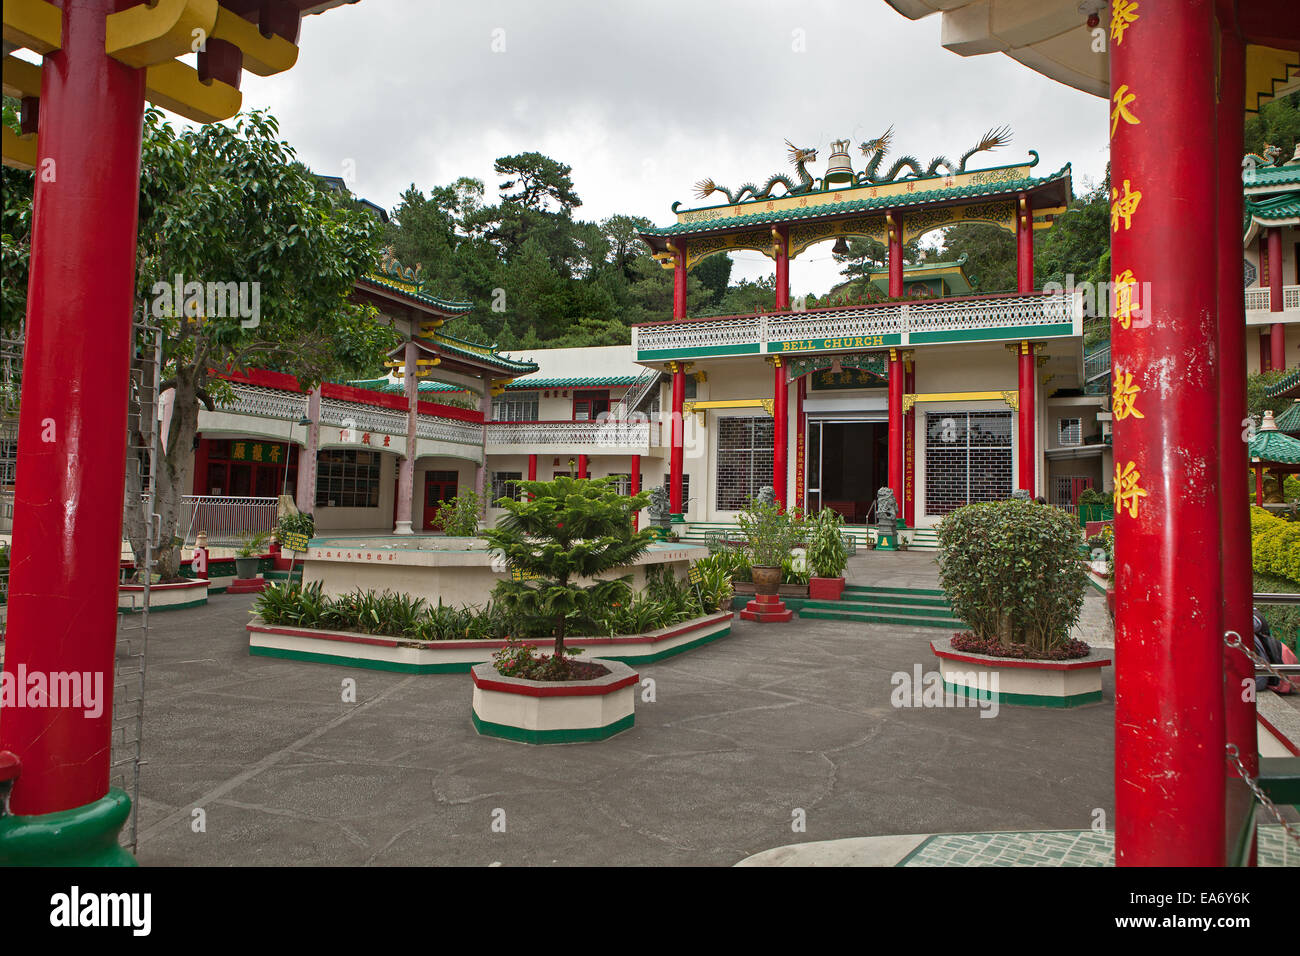 Red columns are features at the Bell Church, a Taoist Temple, located in Baguio City, Northern Luzon, Philippine Islands. Stock Photo